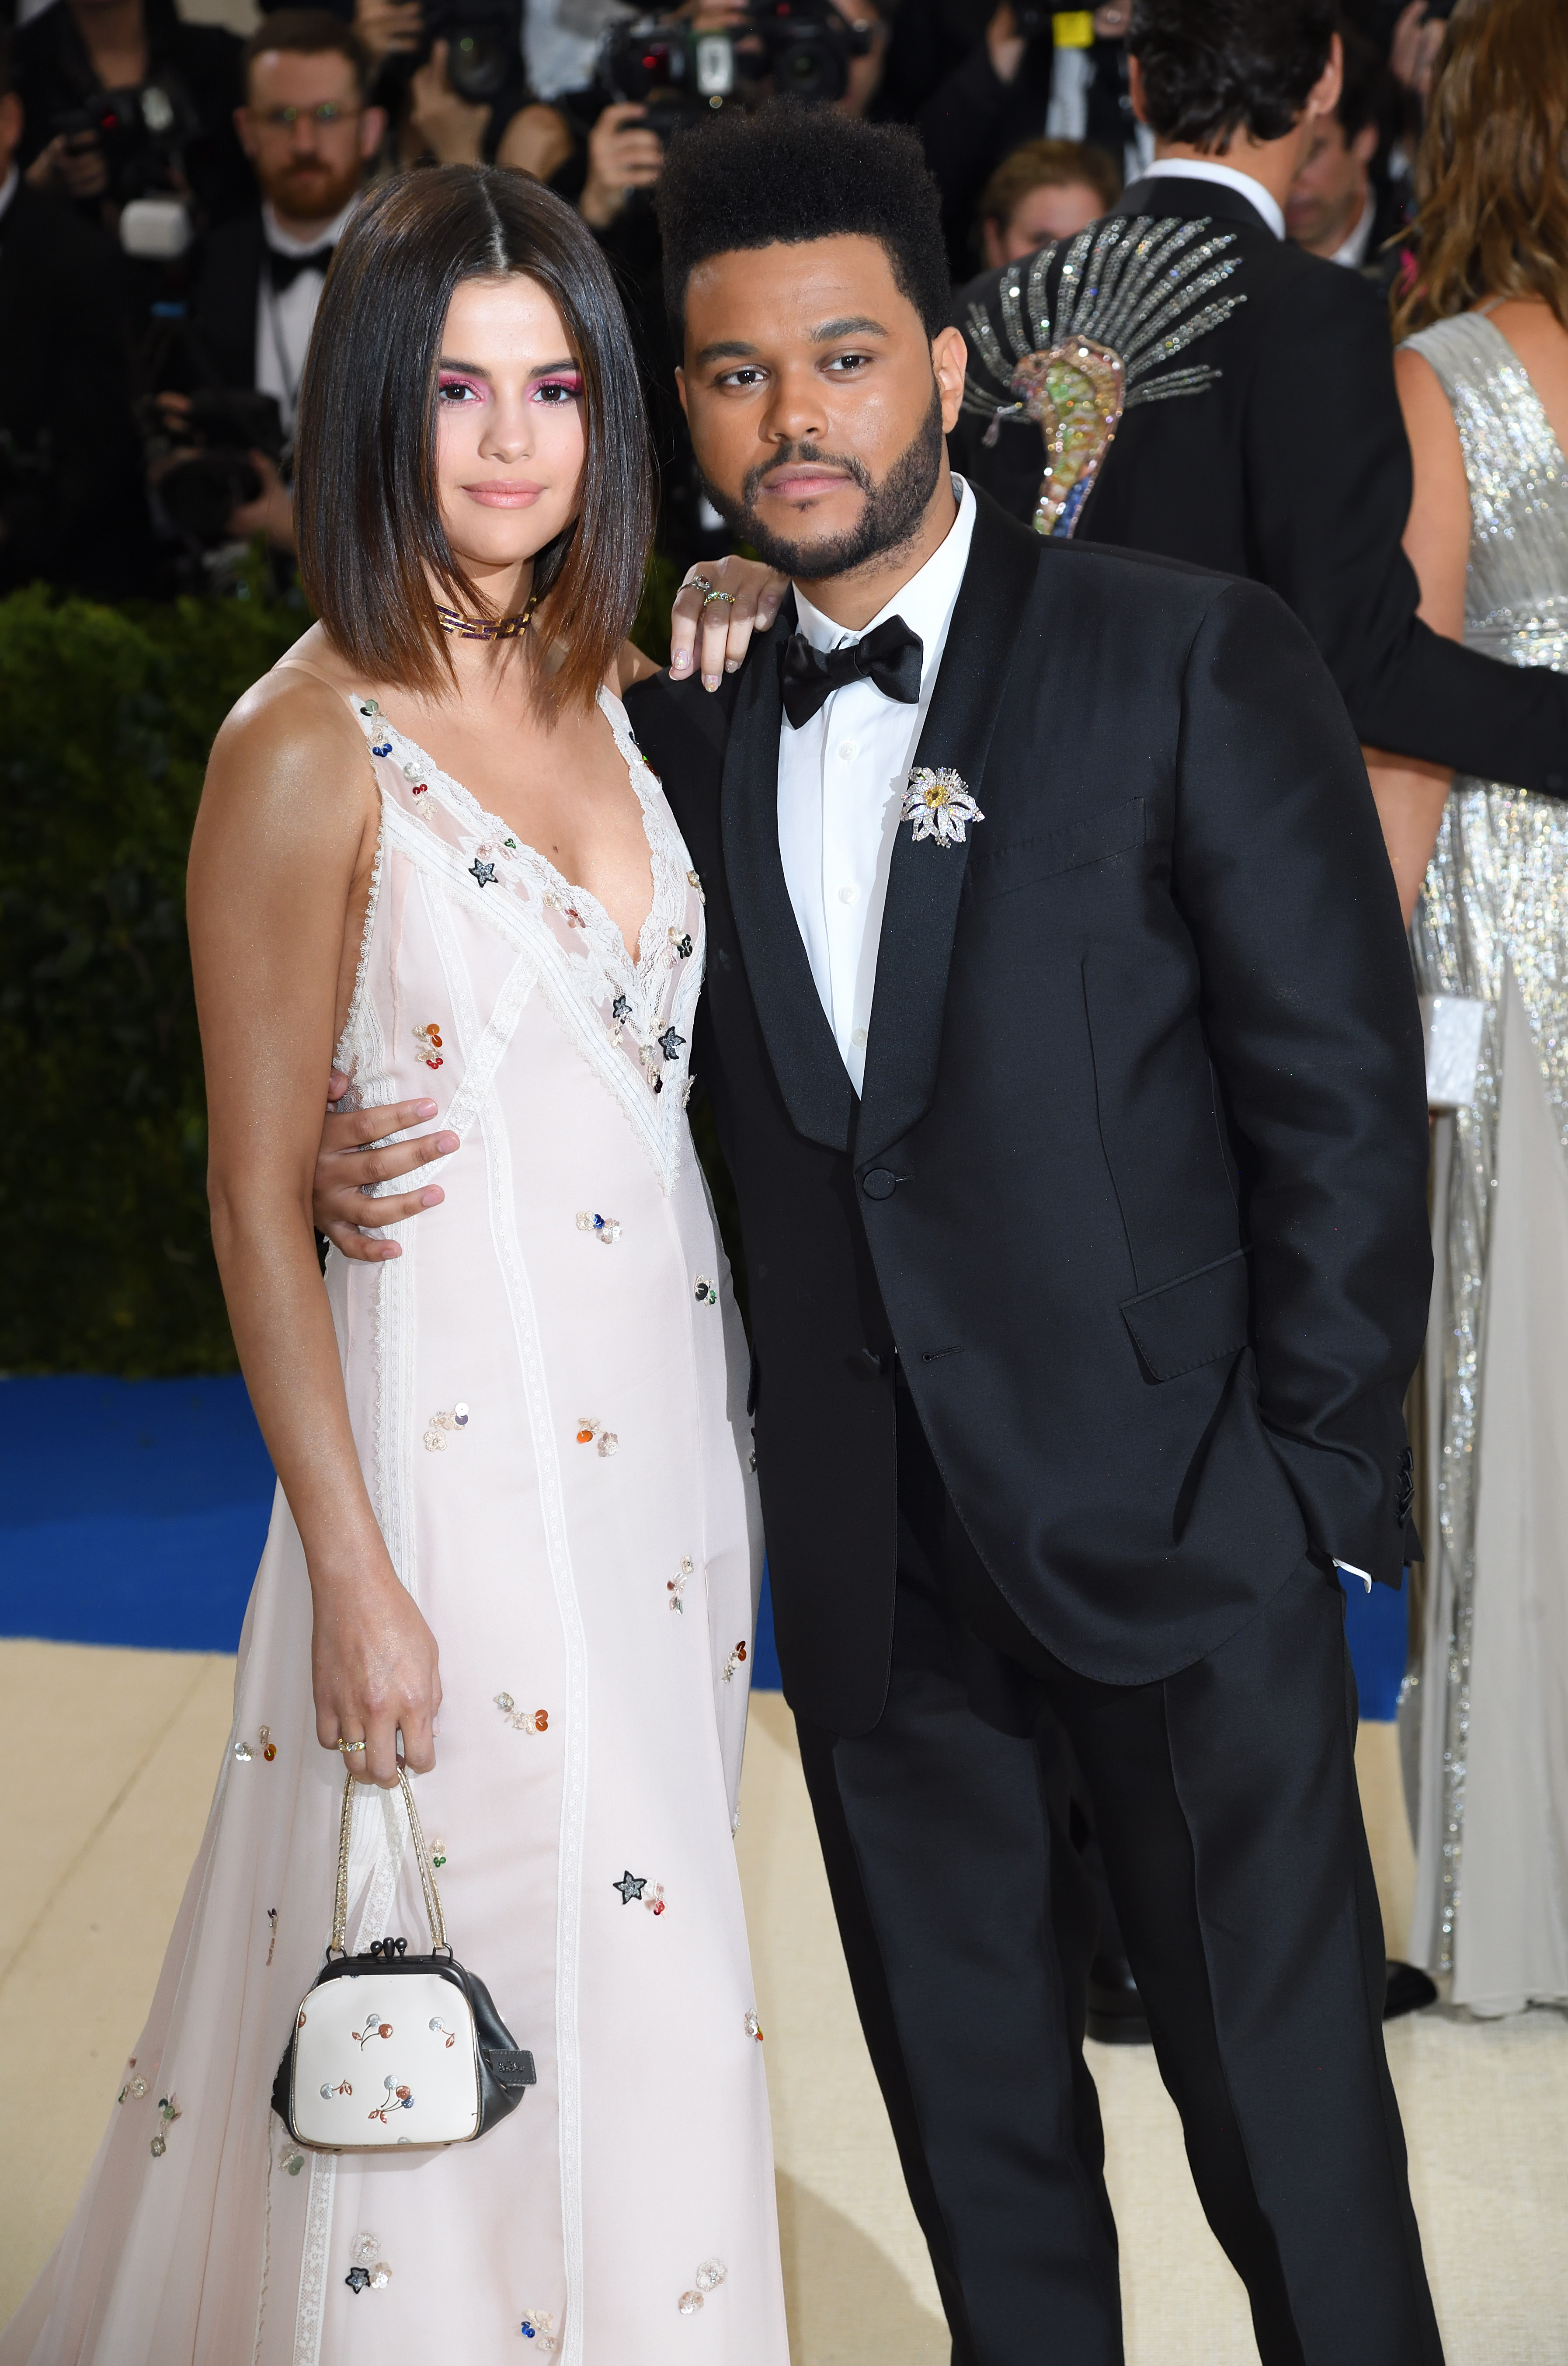 Selena Gomez and The Weeknd in 2017 before their split